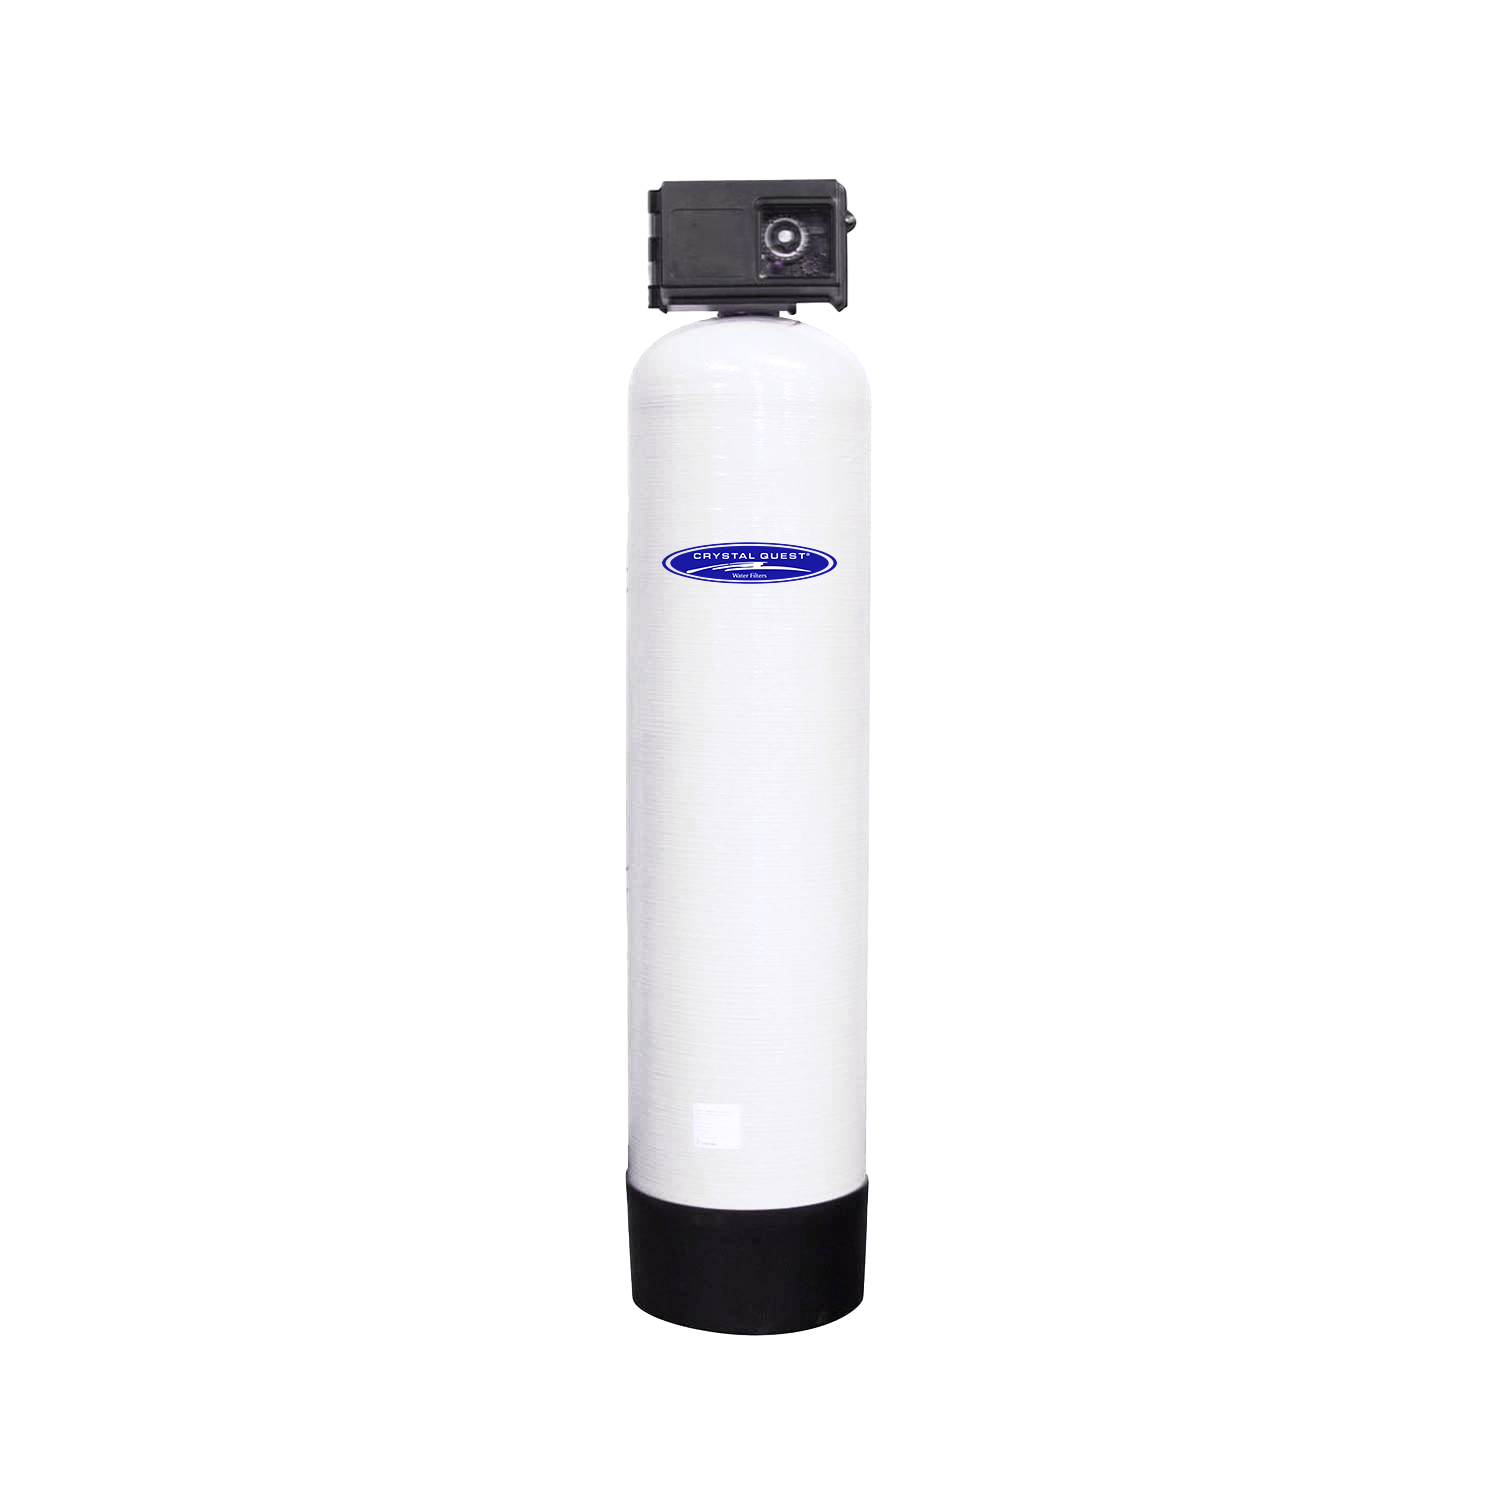 20 GPM / Automatic SMART GAC Water Filtration System - Commercial - Crystal Quest